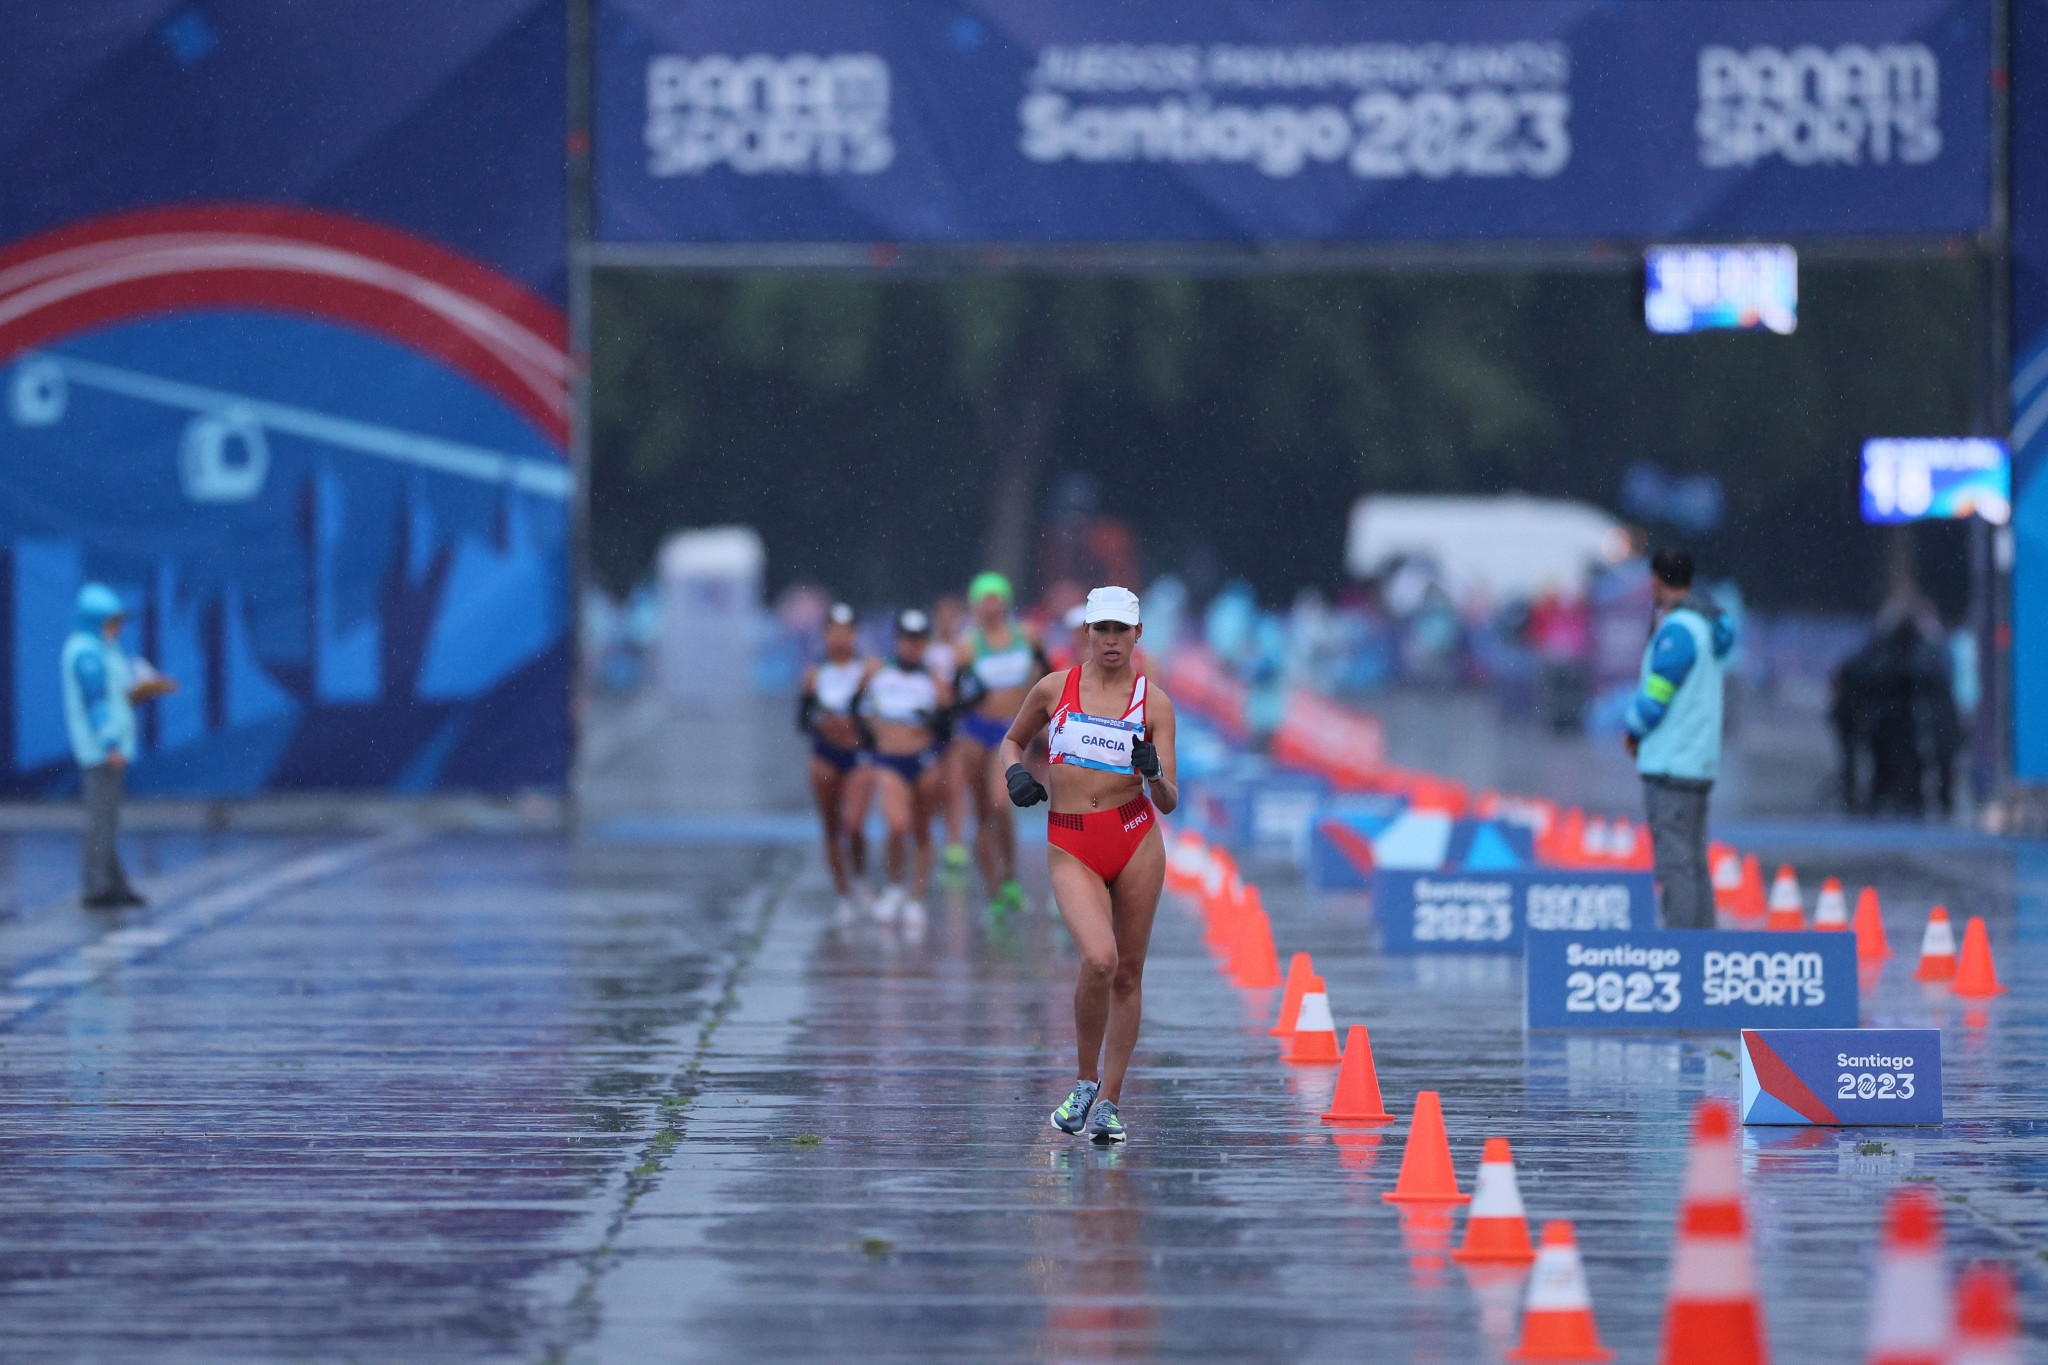 Santiago 2023 suffers embarrassment as women's race walk course discovered to be three kilometres short